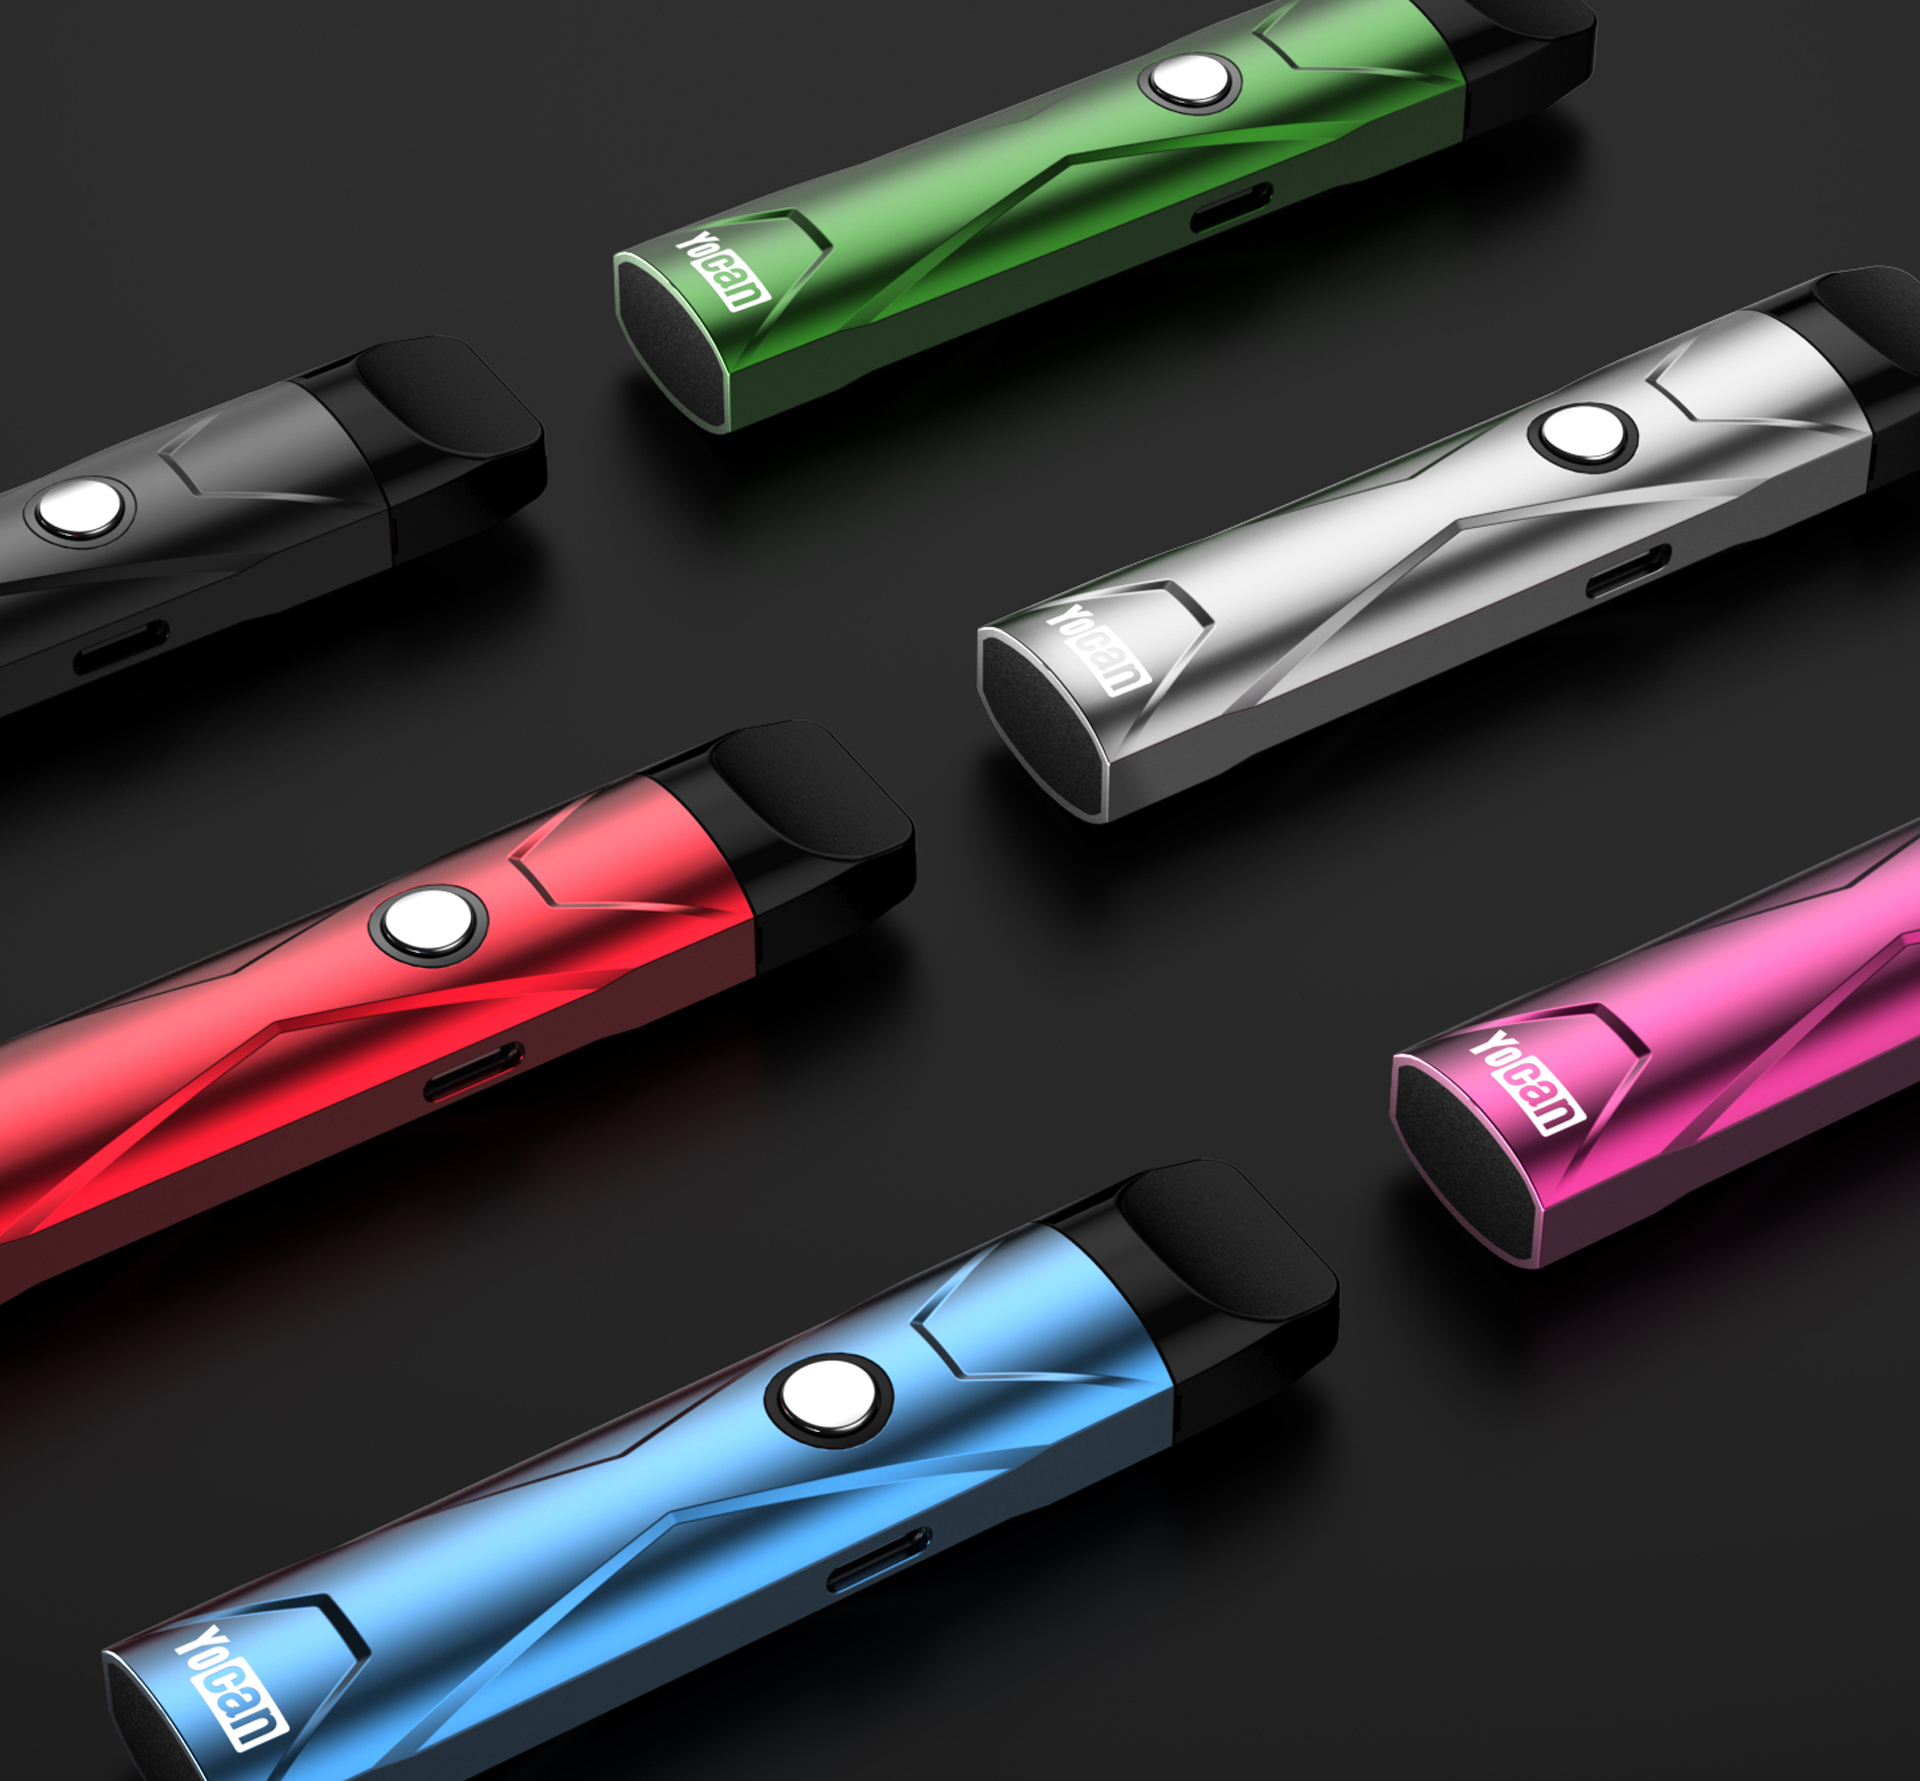 Yocan X Pod System comes with 6 colors.